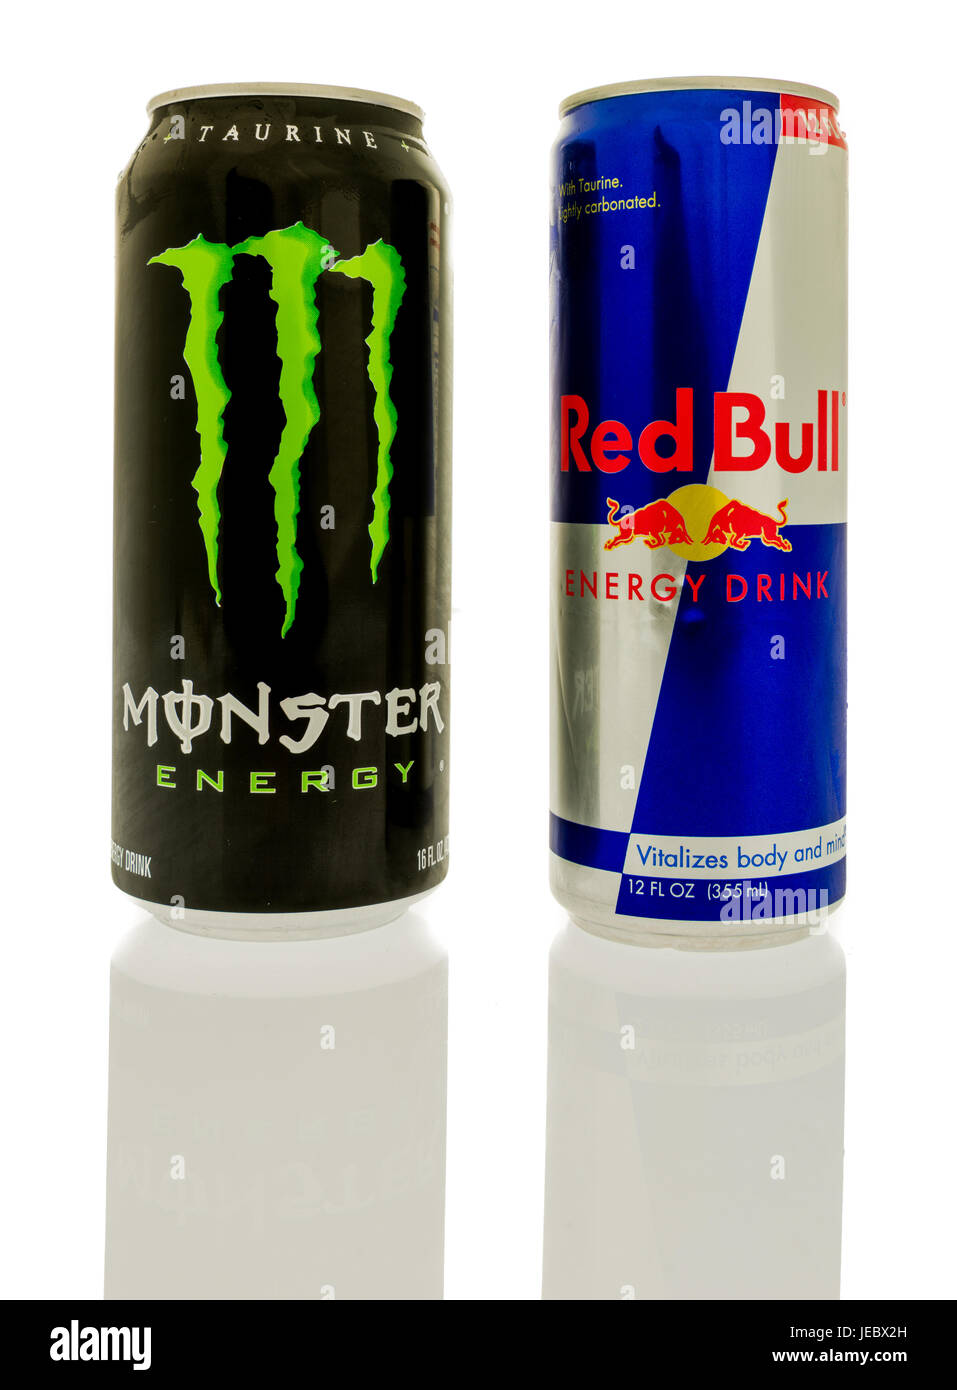 Winneconne, WI -17 June 2017: Cans of Red Bull and Monster energy drinks,  the top two selling energy drinks in the world, on an isolated background  Stock Photo - Alamy